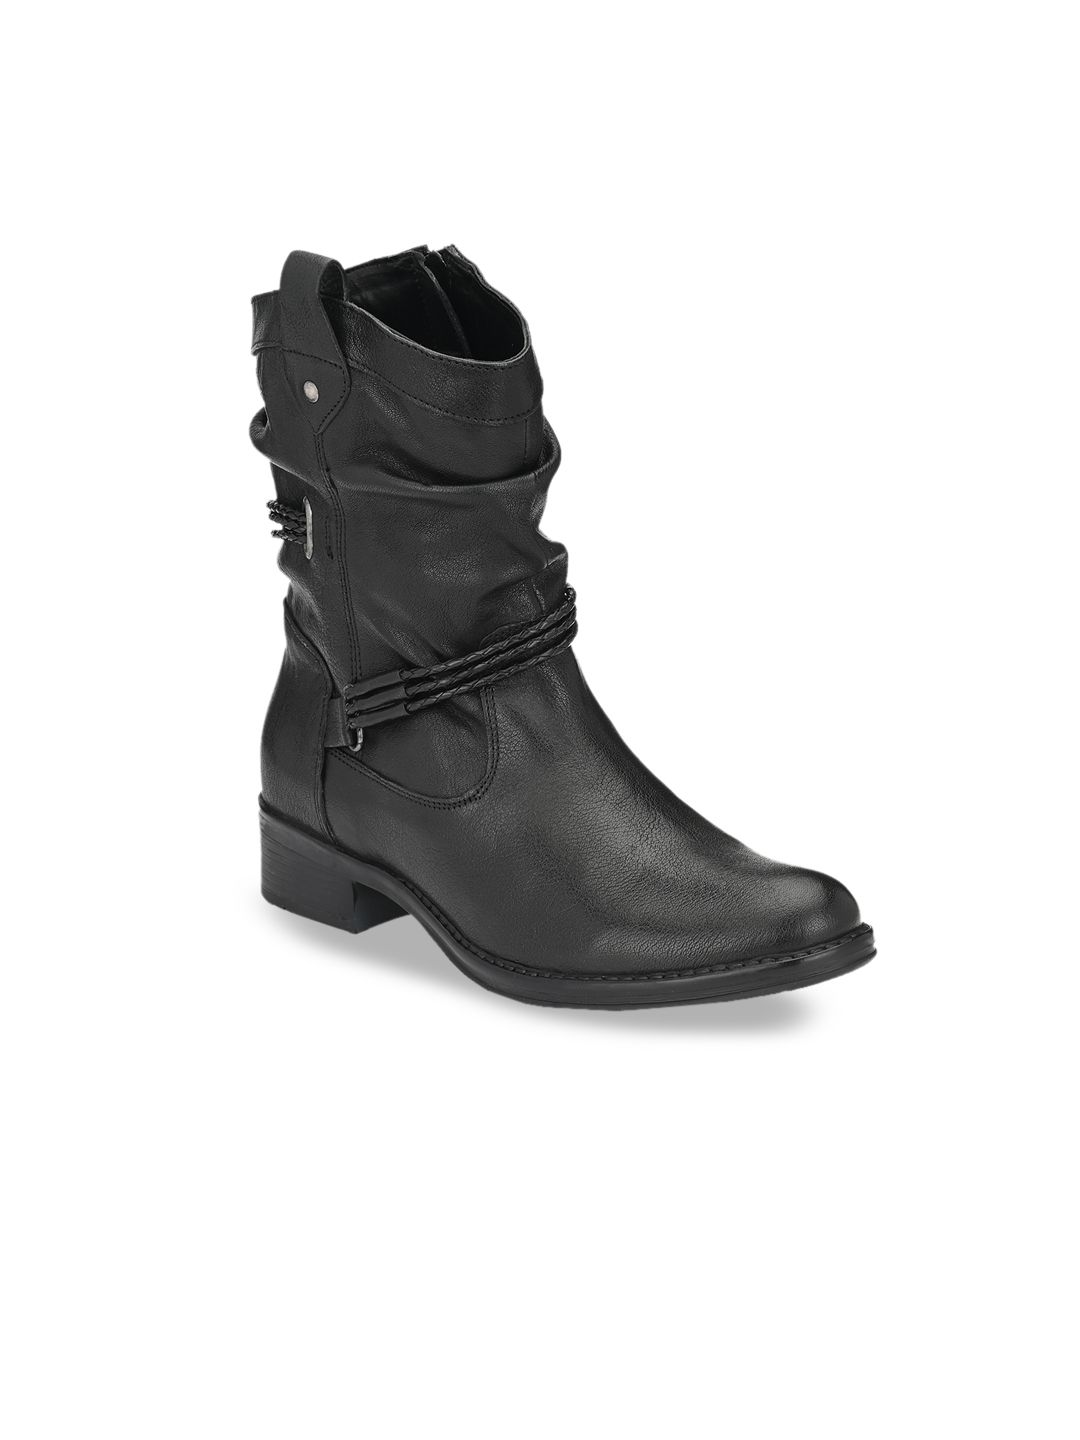 Delize Women Black Solid Heeled High-Top Leather Boots Price in India